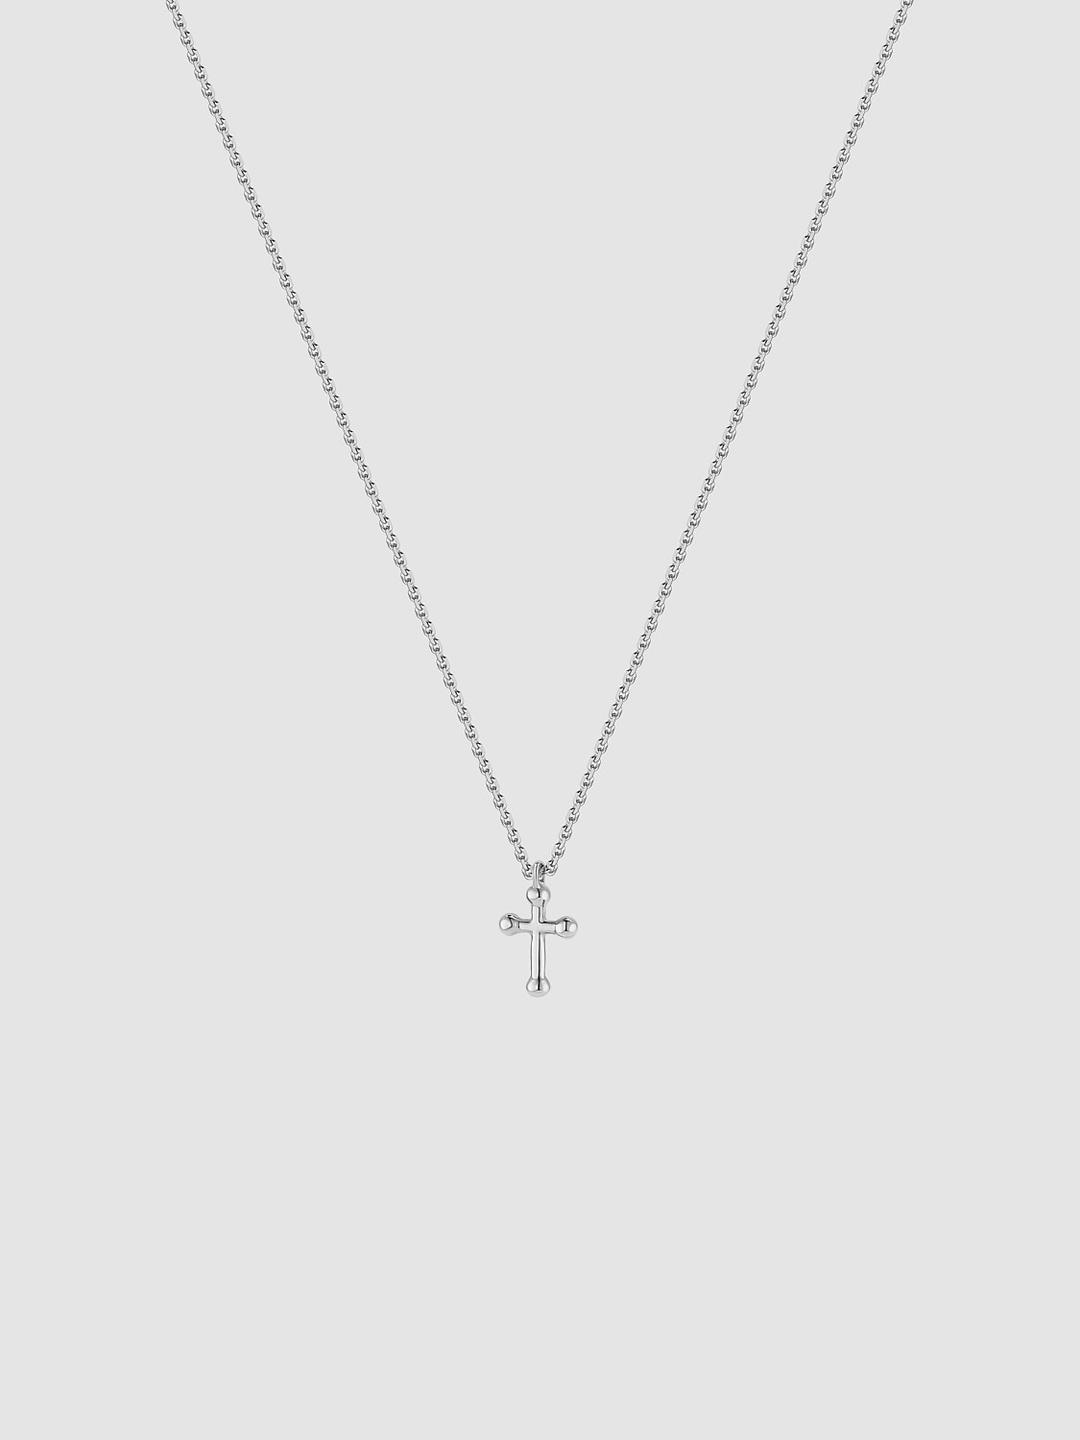 Teeny Cross Necklace White Gold